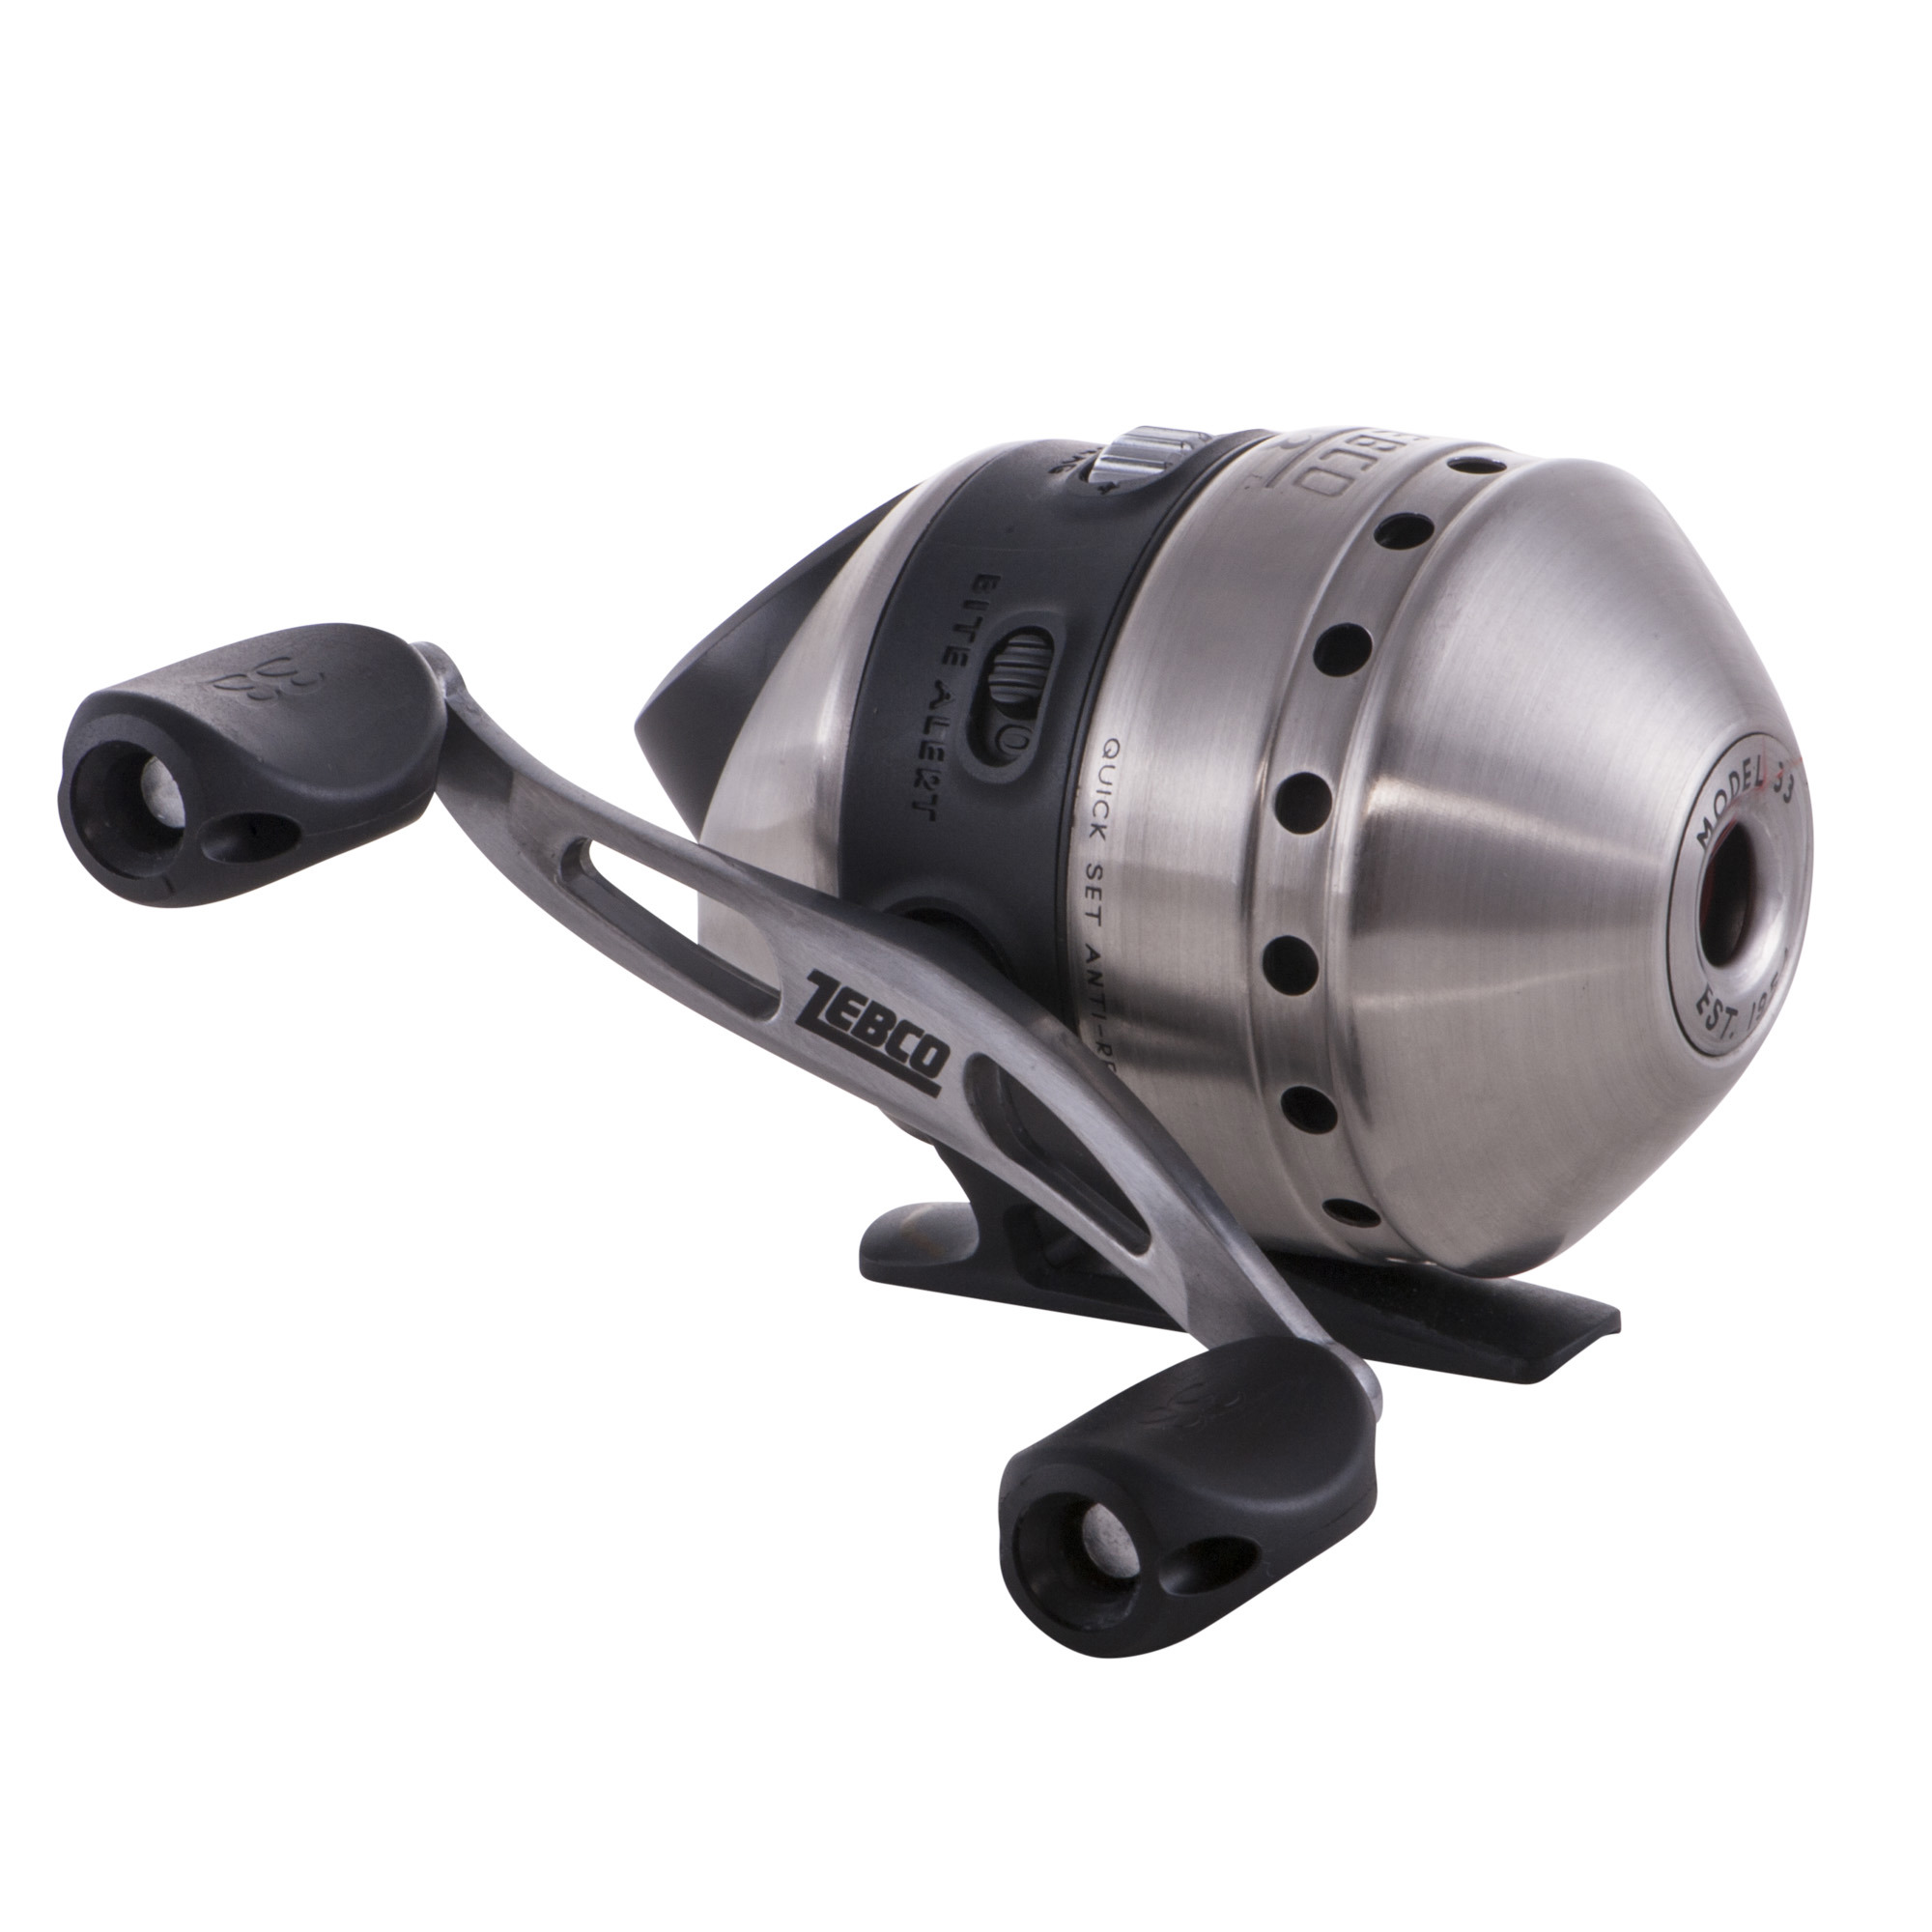 Spincast Reels for Fun and Easy Fishing